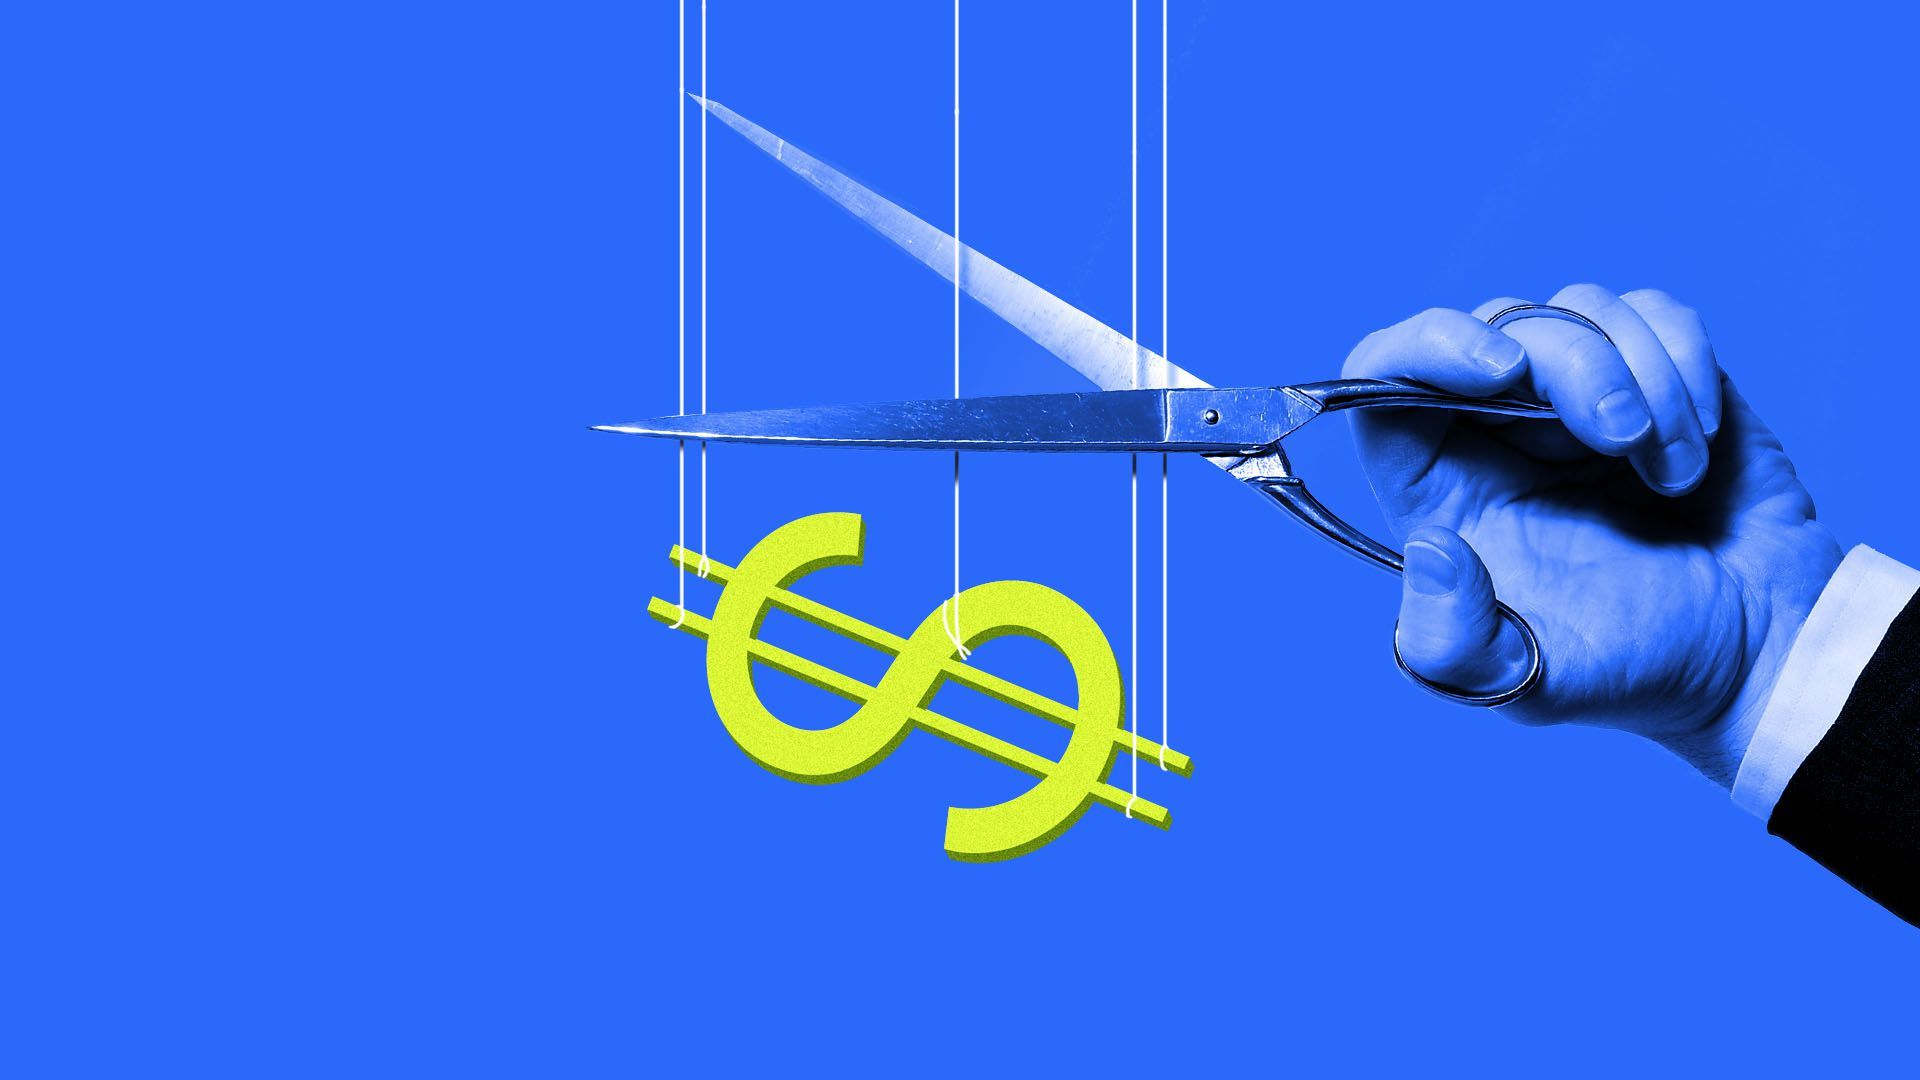 Illustration of a dollar sign with strings attached to it possibly about to get cut by a hand with scissors.